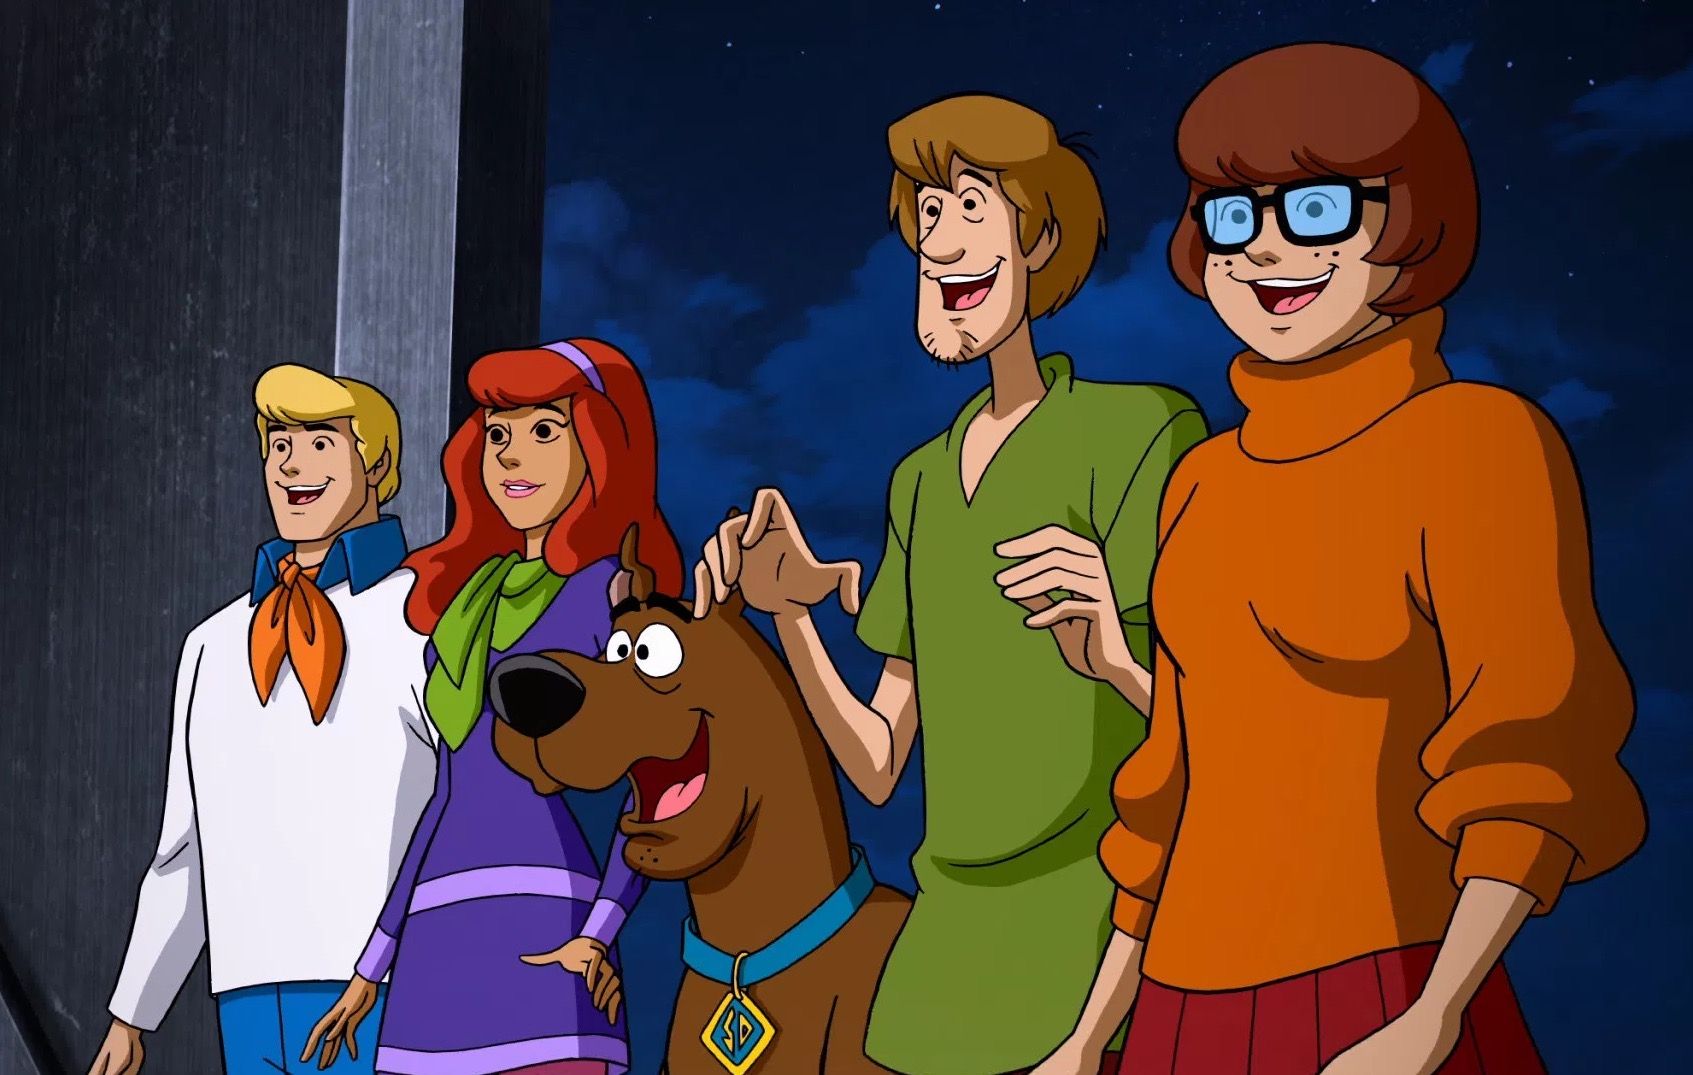 Scooby-Doo' characters Daphne and Velma getting live-action spinoff film